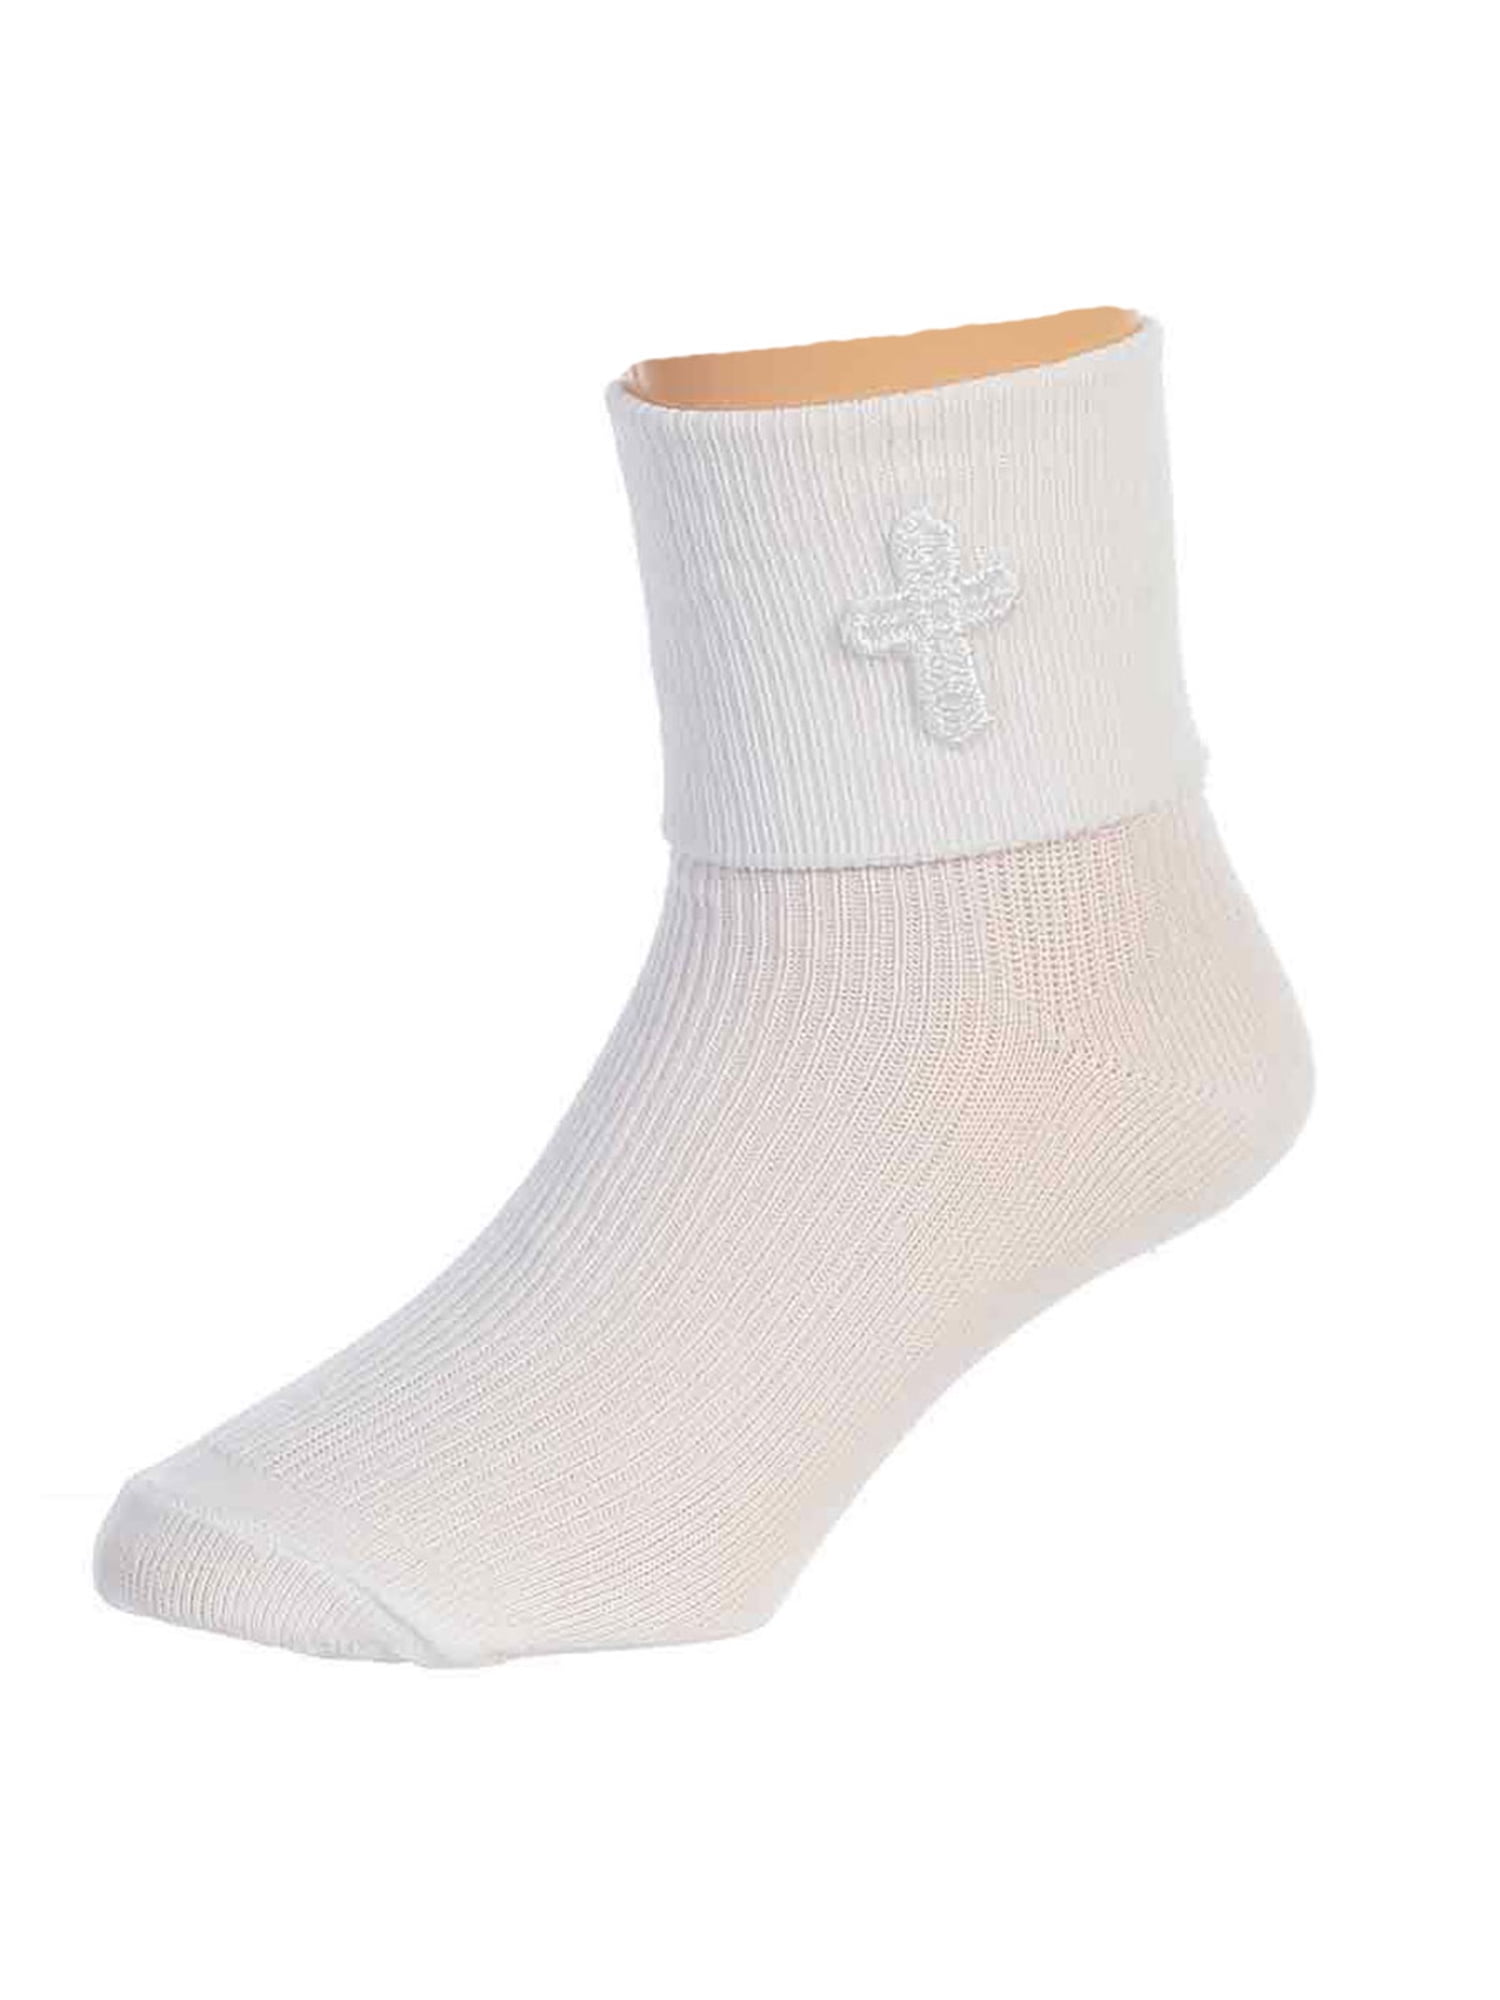 Boys White First Communion Baptism Special Occasion Socks with Cross 